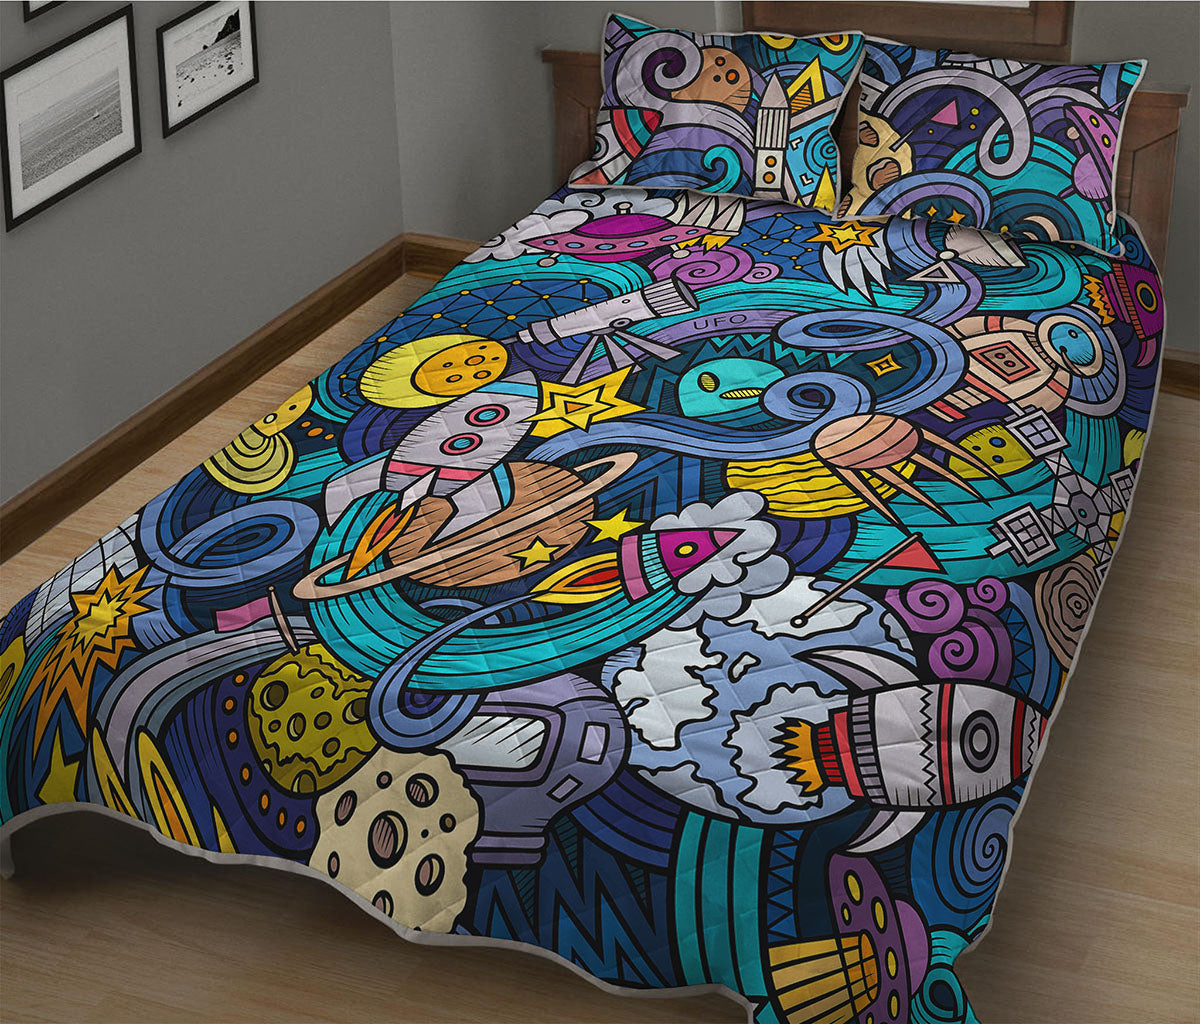 Abstract Cartoon Galaxy Space Print Quilt Bed Set